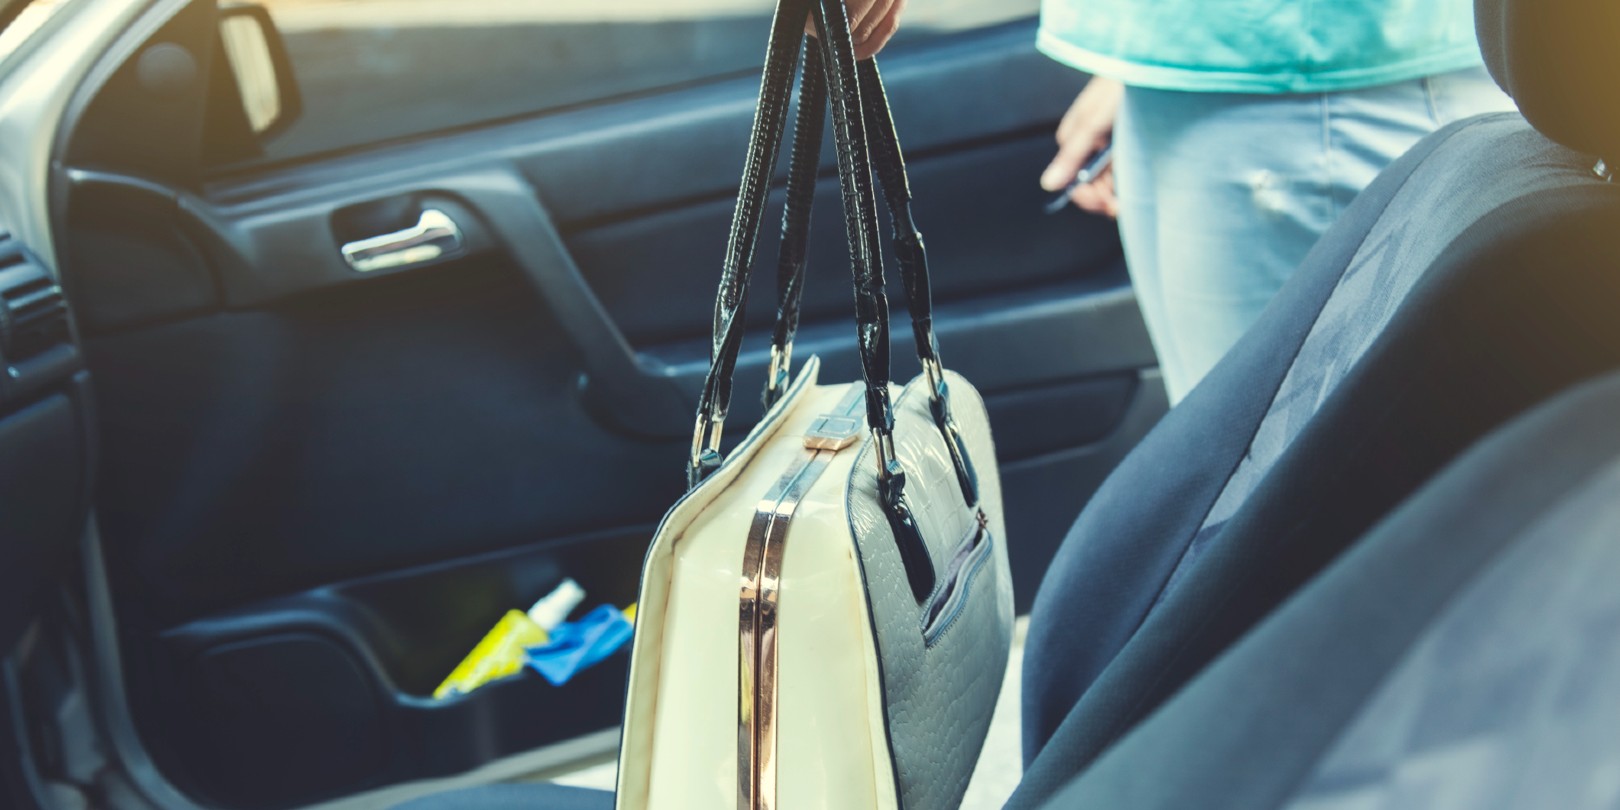 https://www.oldcarsweekly.com/review/wp-content/uploads/2023/05/purse-hook-for-cars-old-cars-weekly.jpg